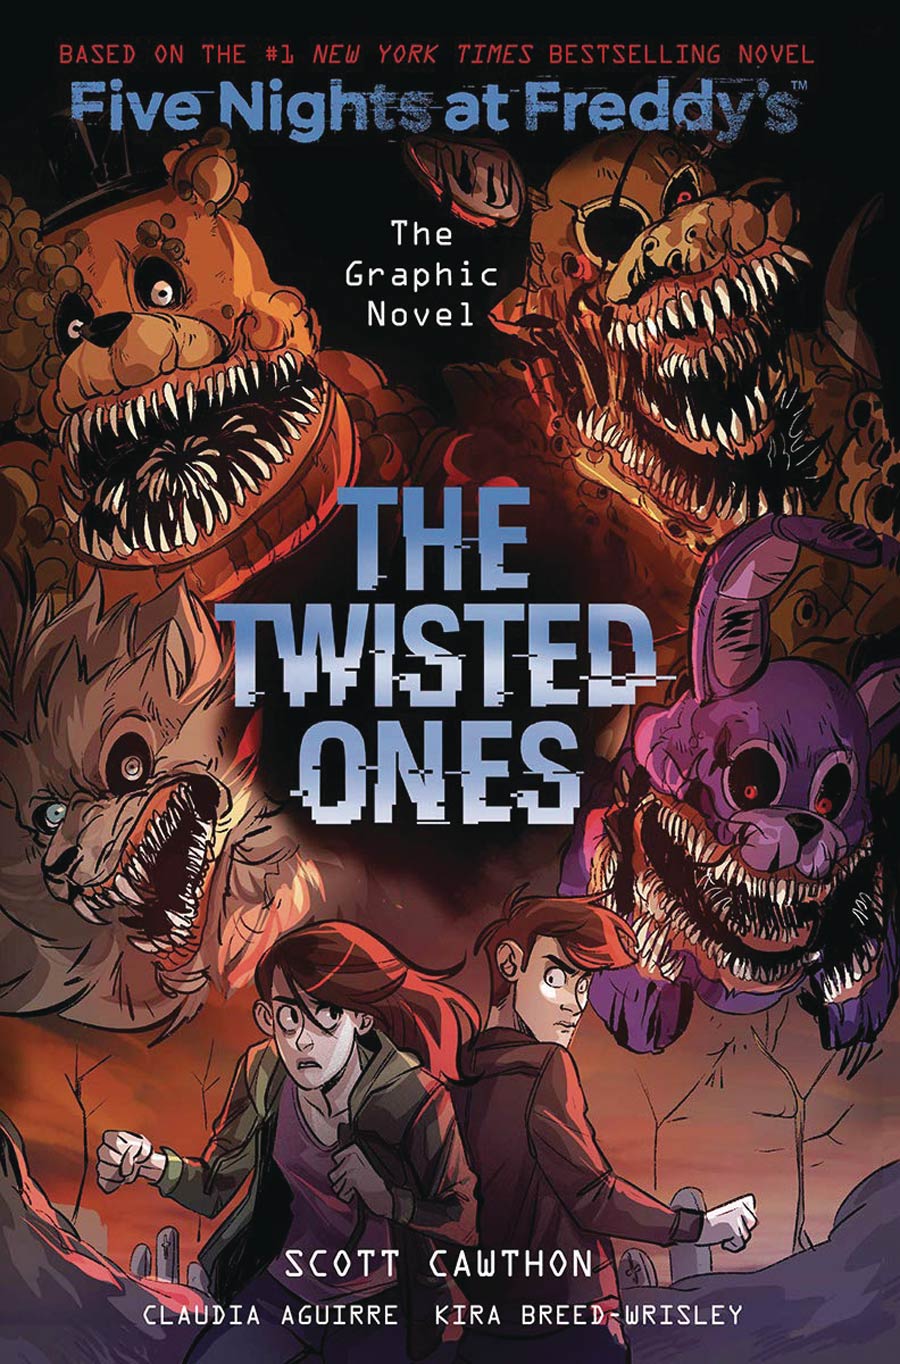 Five Nights At Freddys The Graphic Novel Vol 2 The Twisted Ones HC